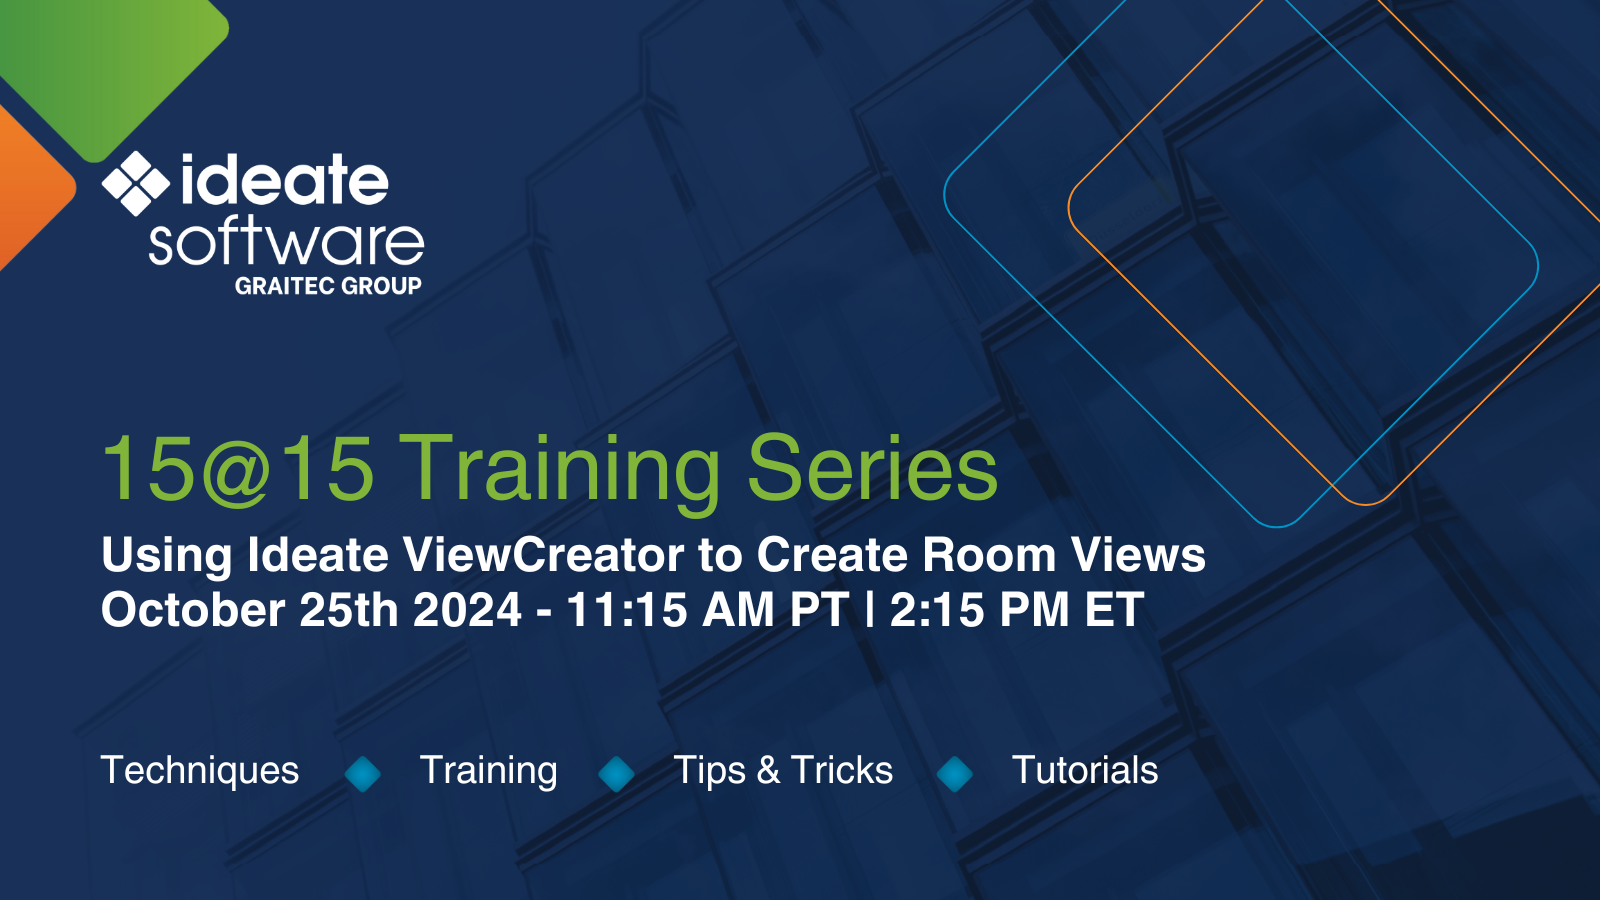 15@15 Ideate Software Training Series